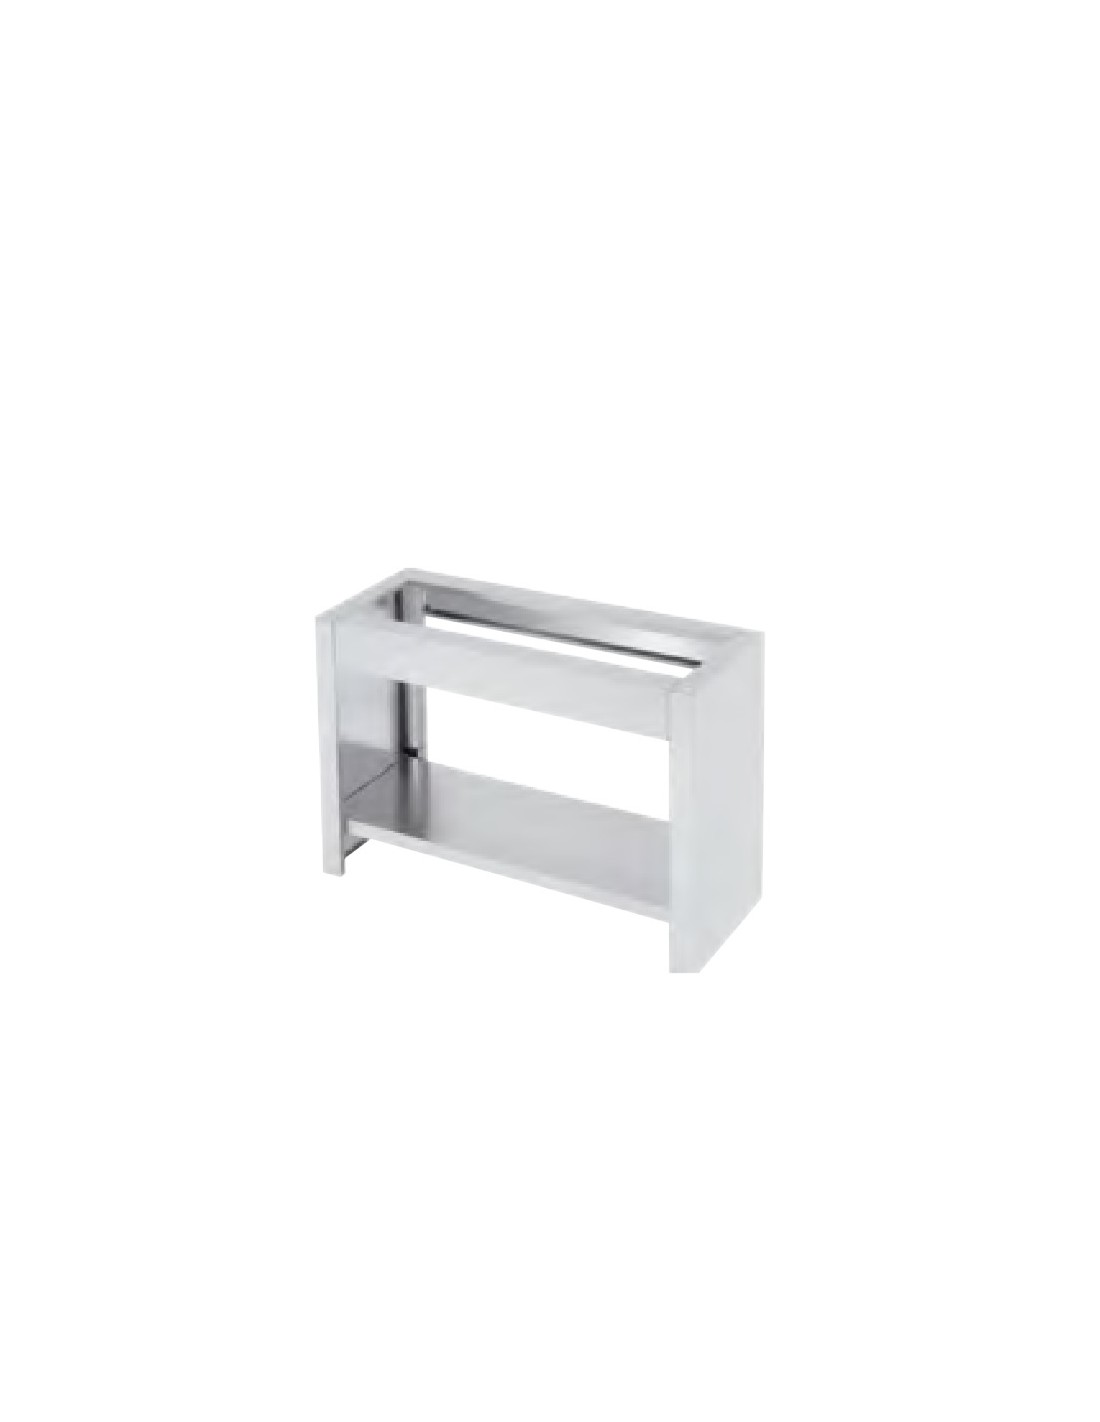 Open stainless steel support with bottom-top Dimensions cm 60 x 45 x 67.4 h